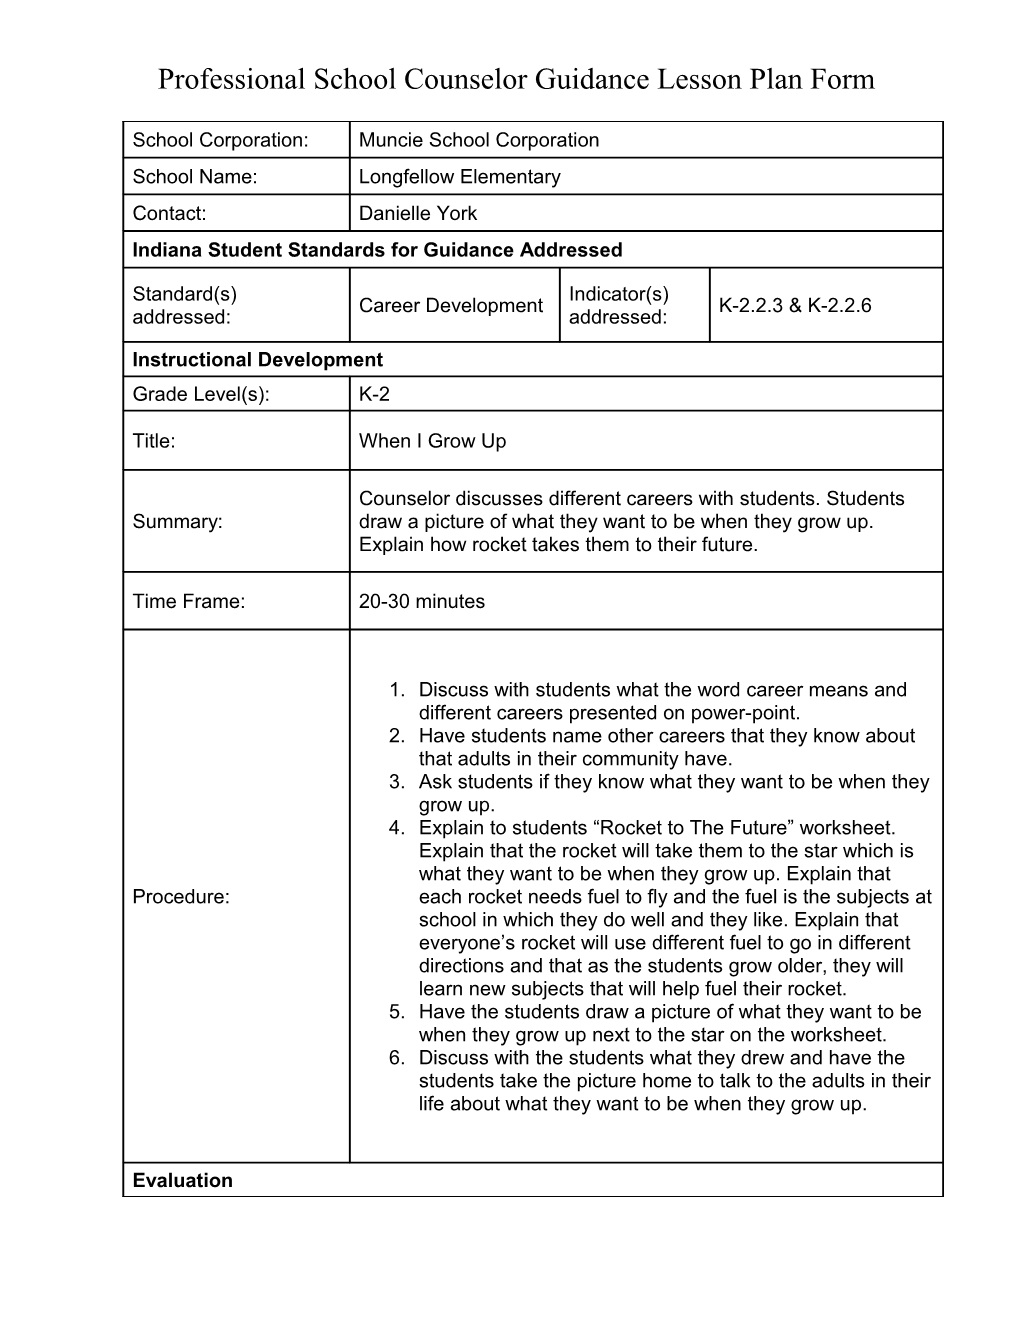 Professional School Counselor Guidance Lesson Plan Form s1